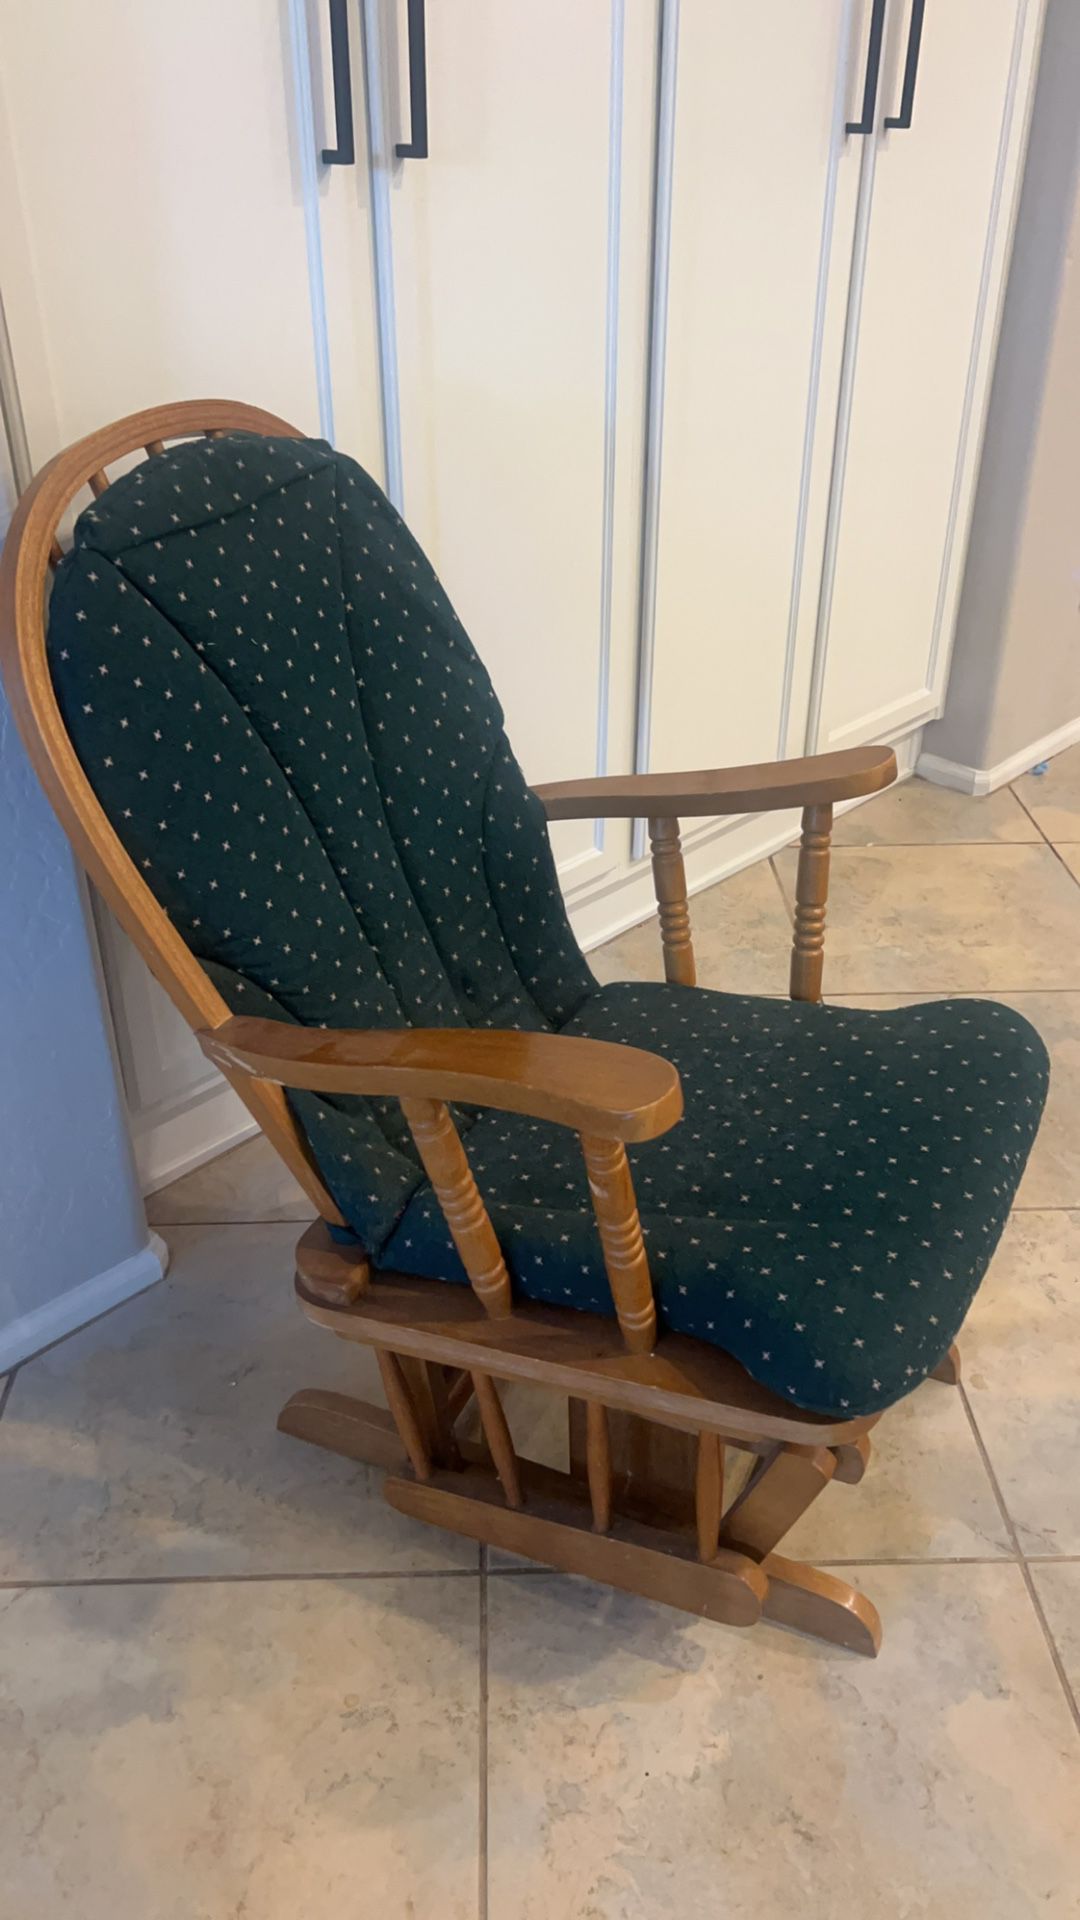 Solid wood rocking chair